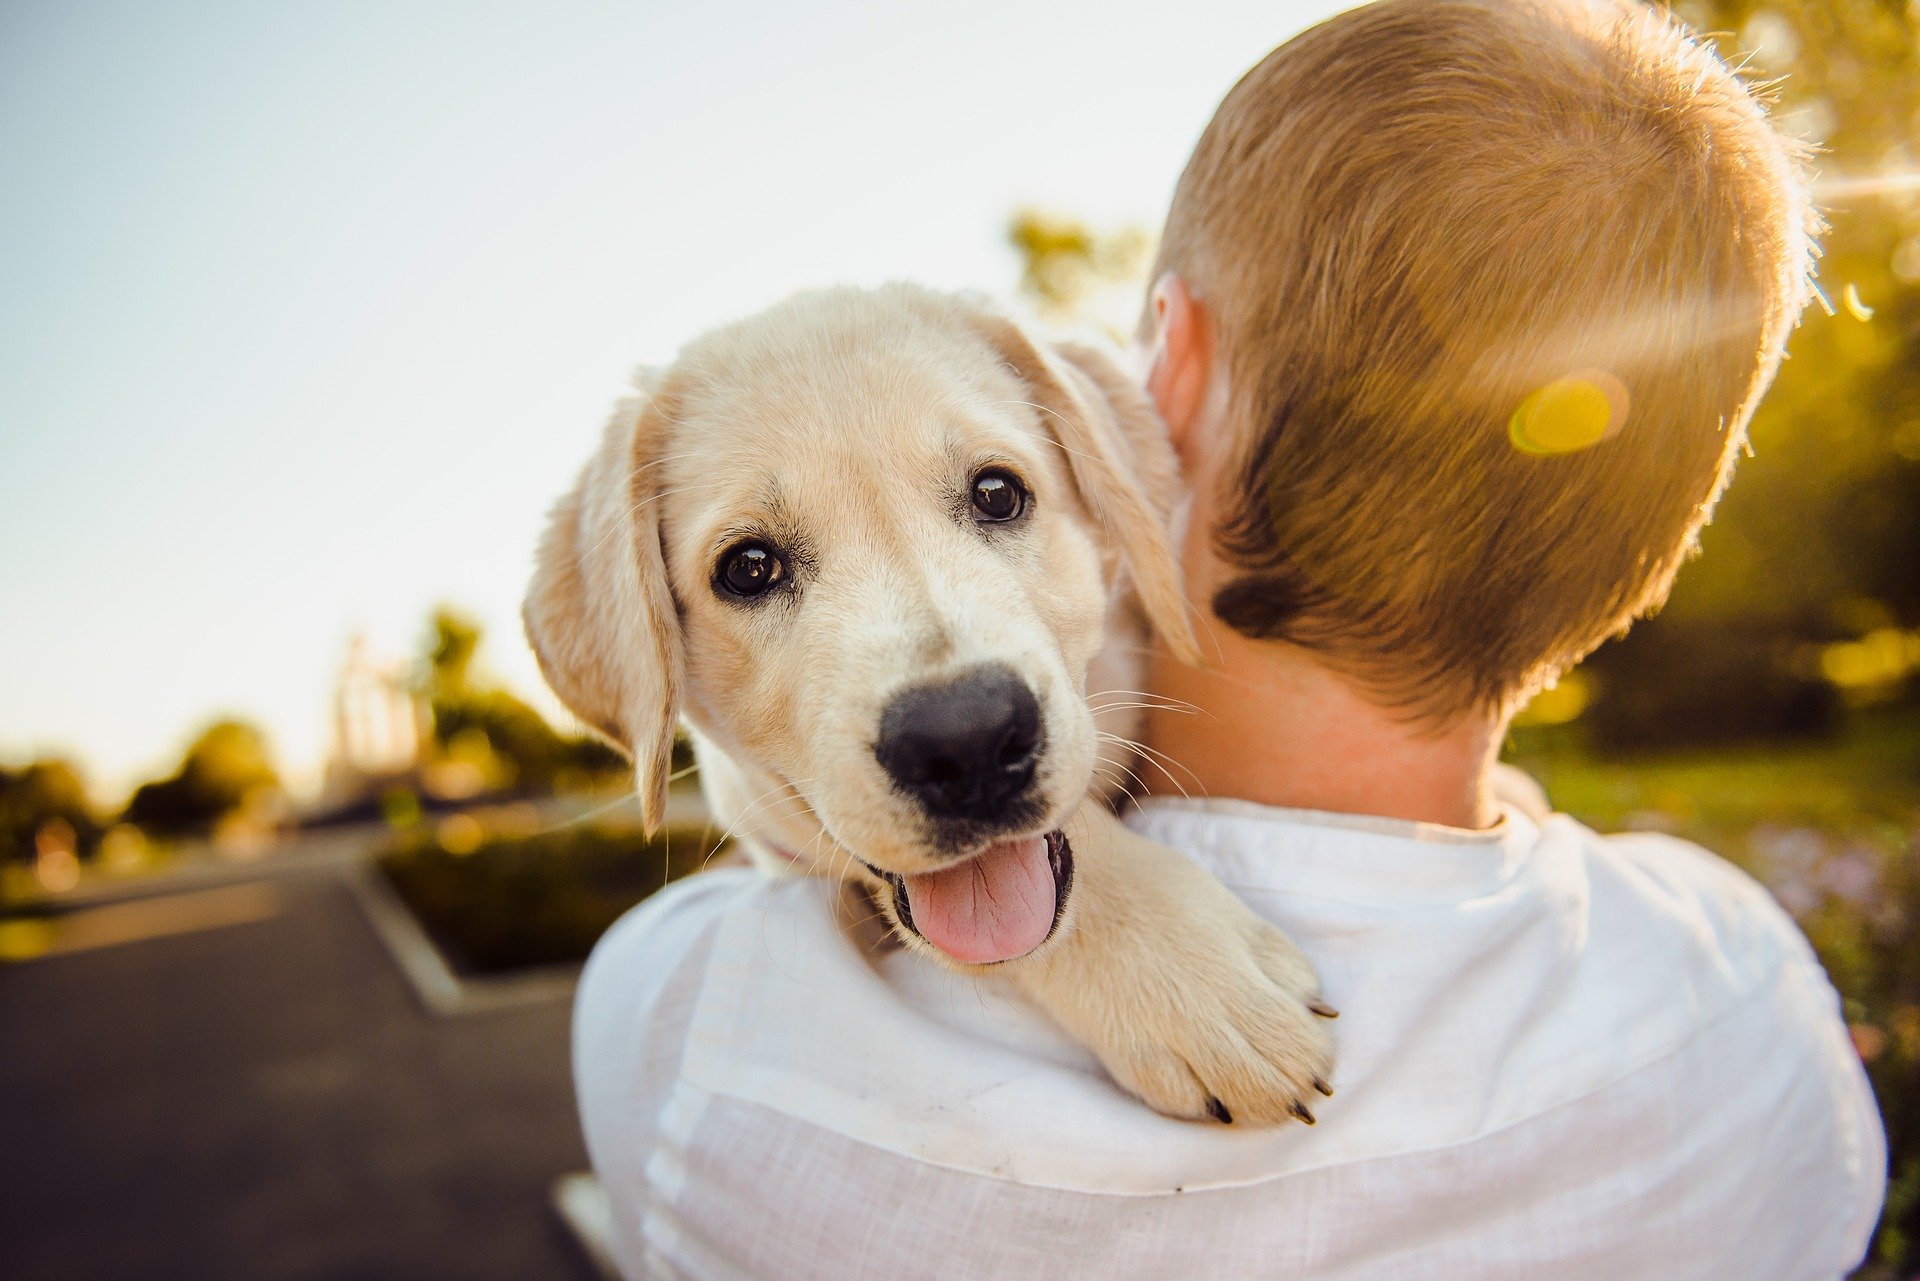 Preparing Your Home for a New Dog